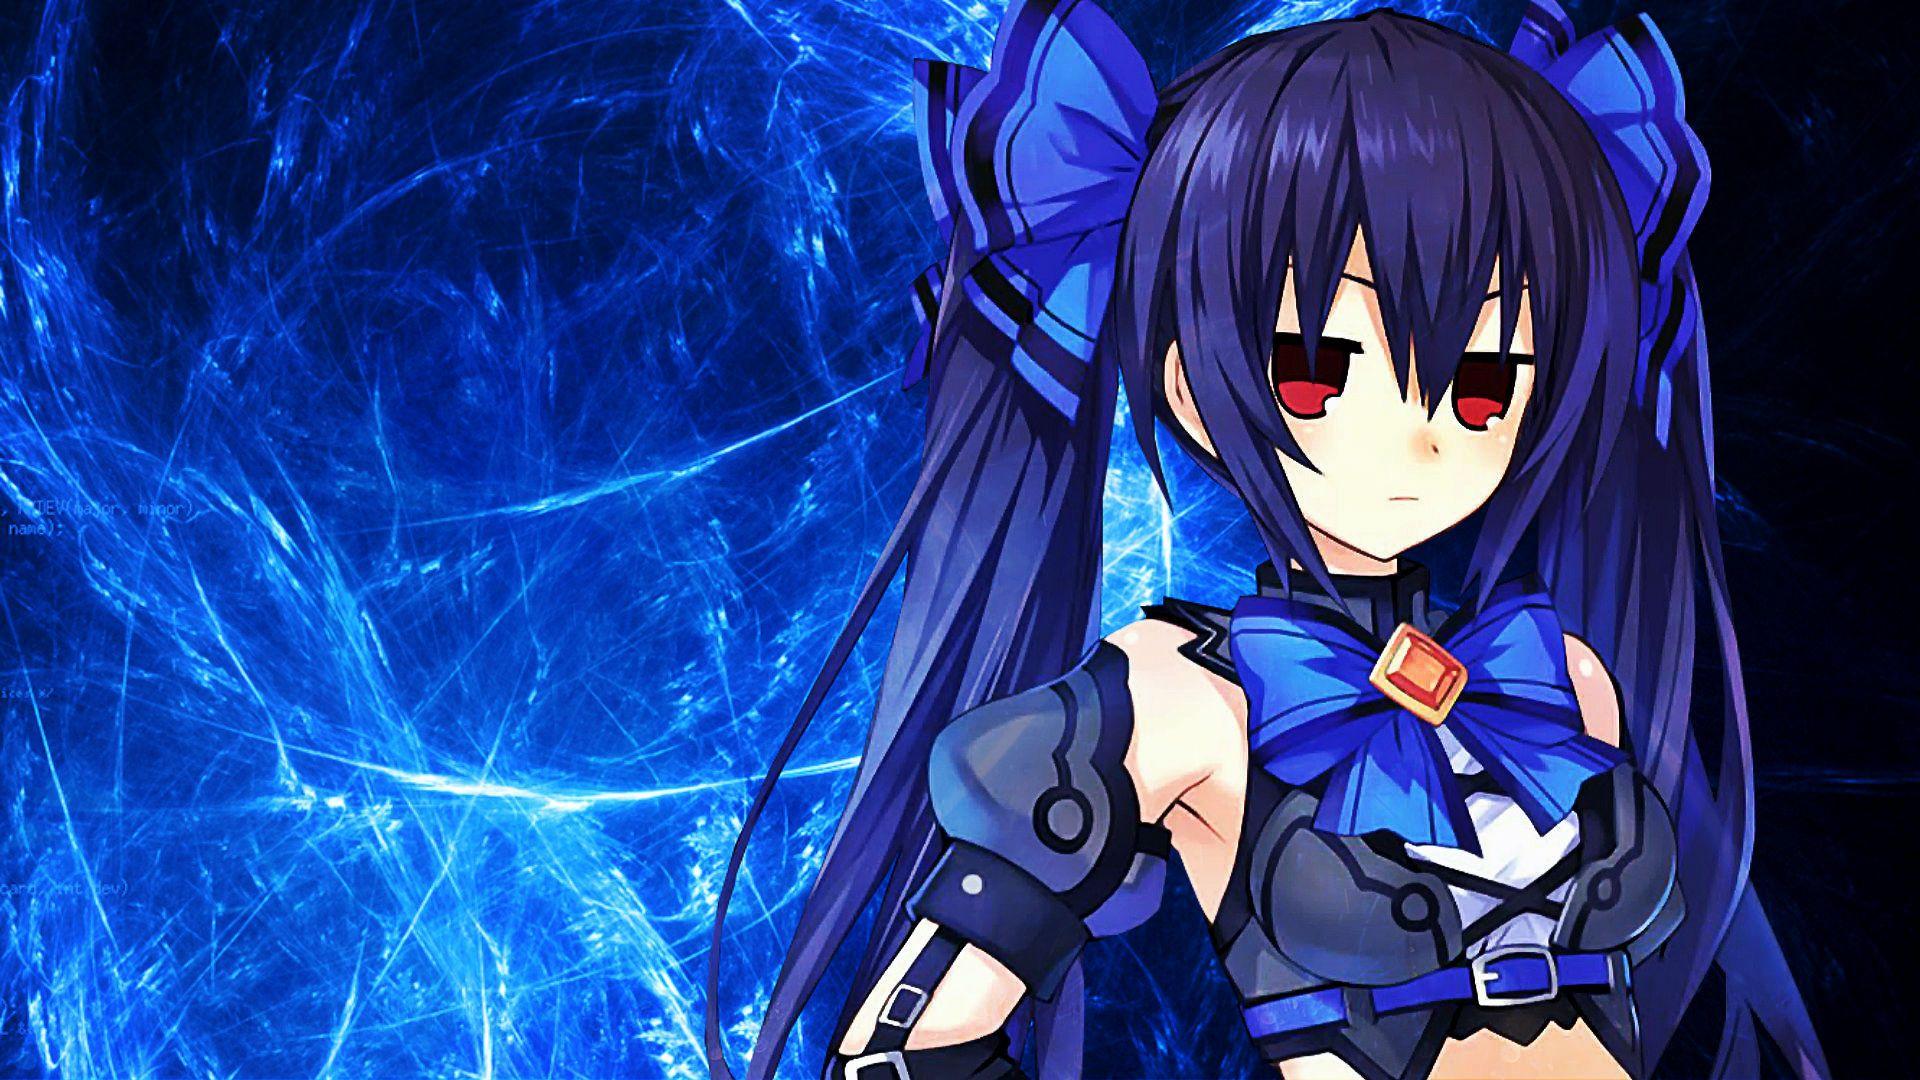 Hyperdimension Neptunia Wallpapers Wallpaper Cave Images, Photos, Reviews